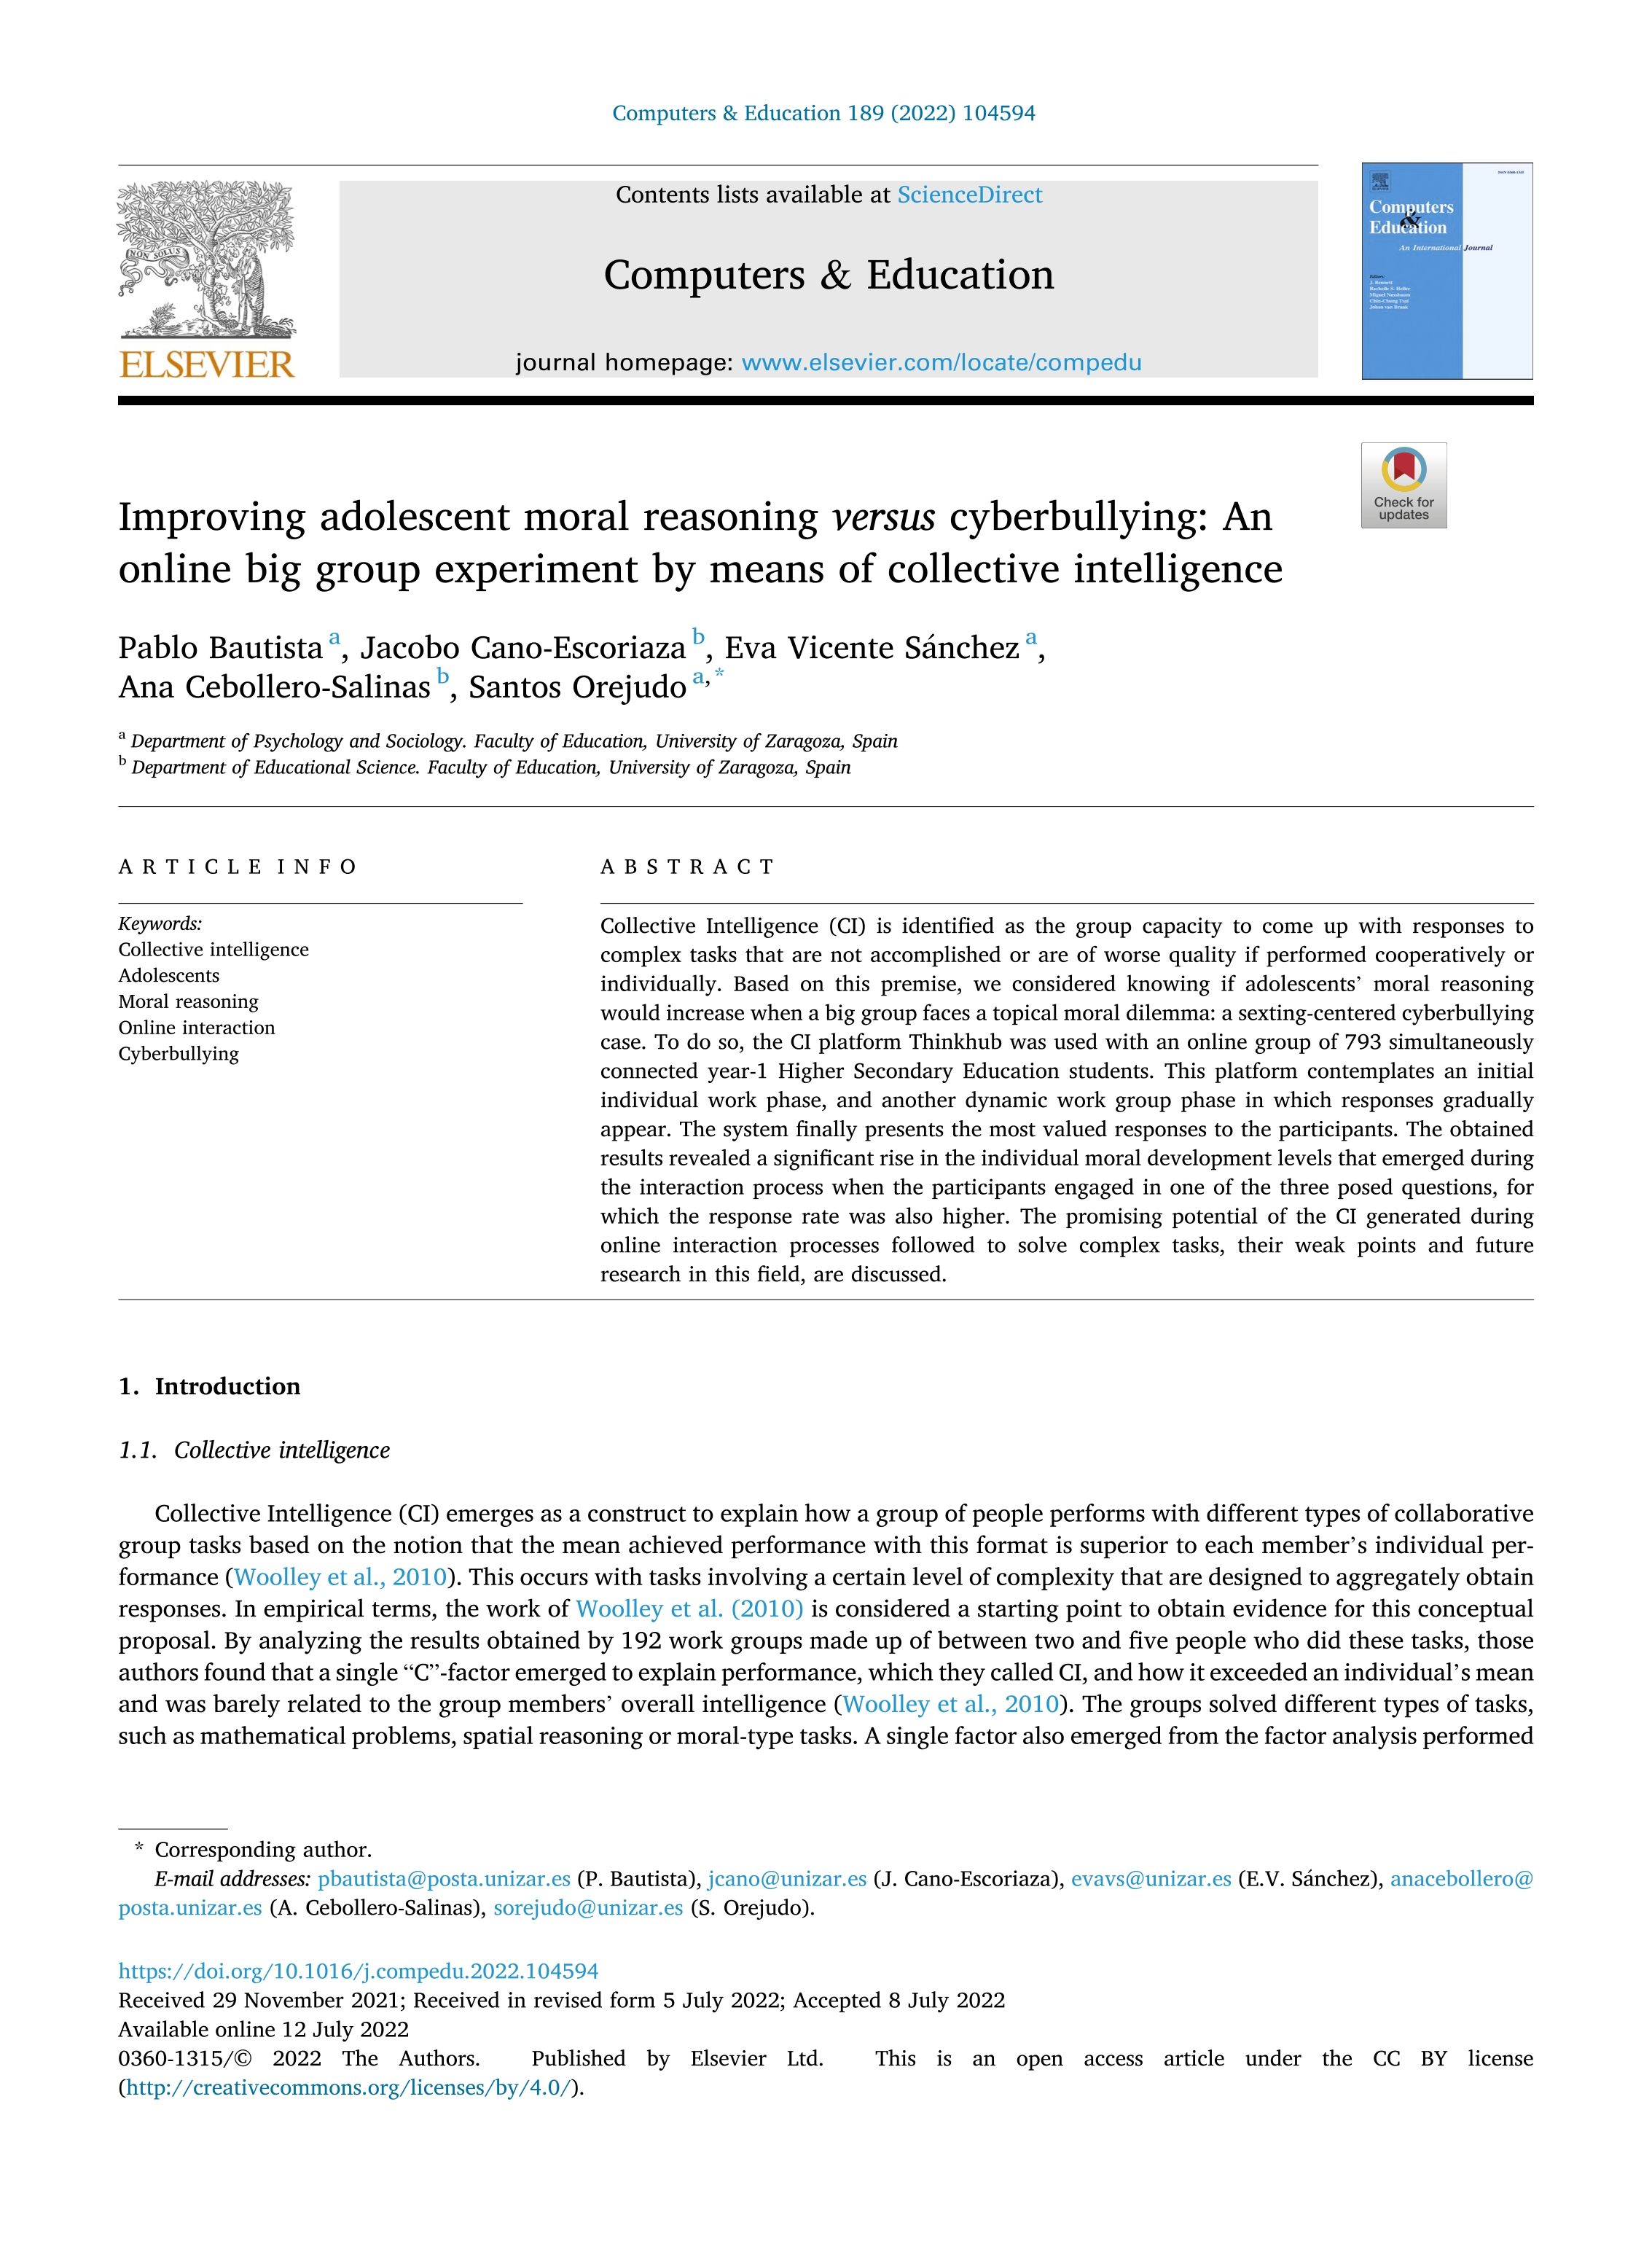 Improving adolescent moral reasoning versus cyberbullying: An online big group experiment by means of collective intelligence